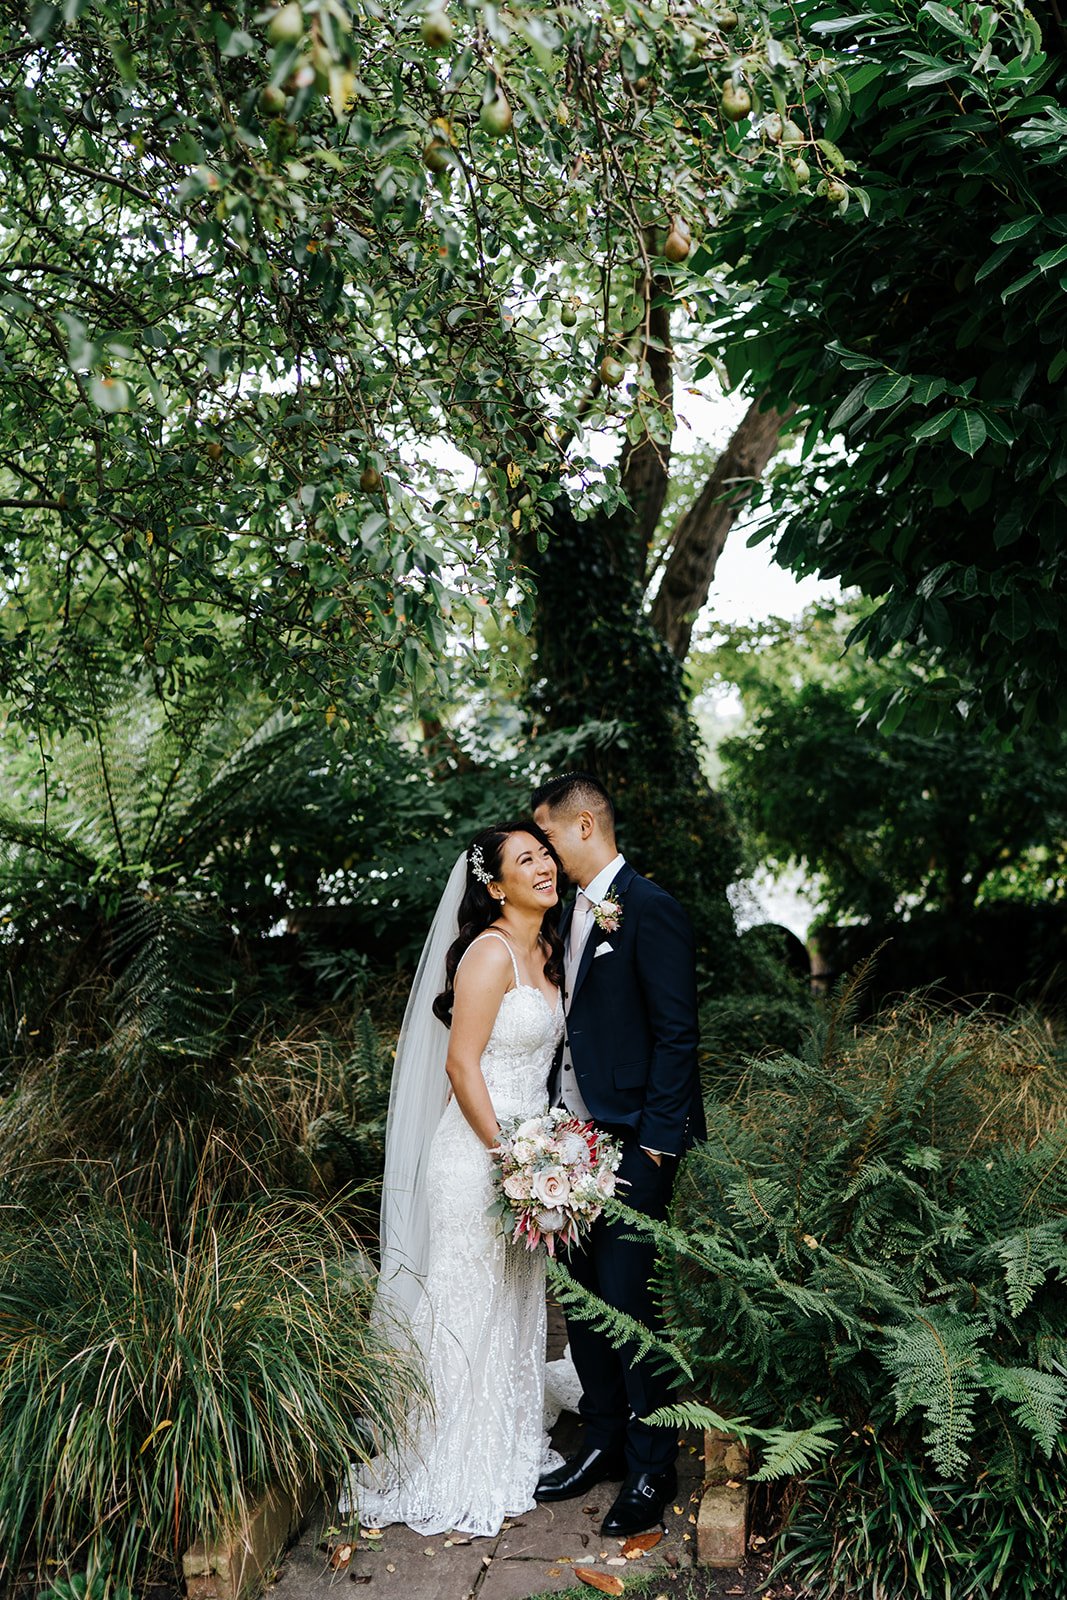 Bride and groom pose and cuddle in green, foliage heavy photograph